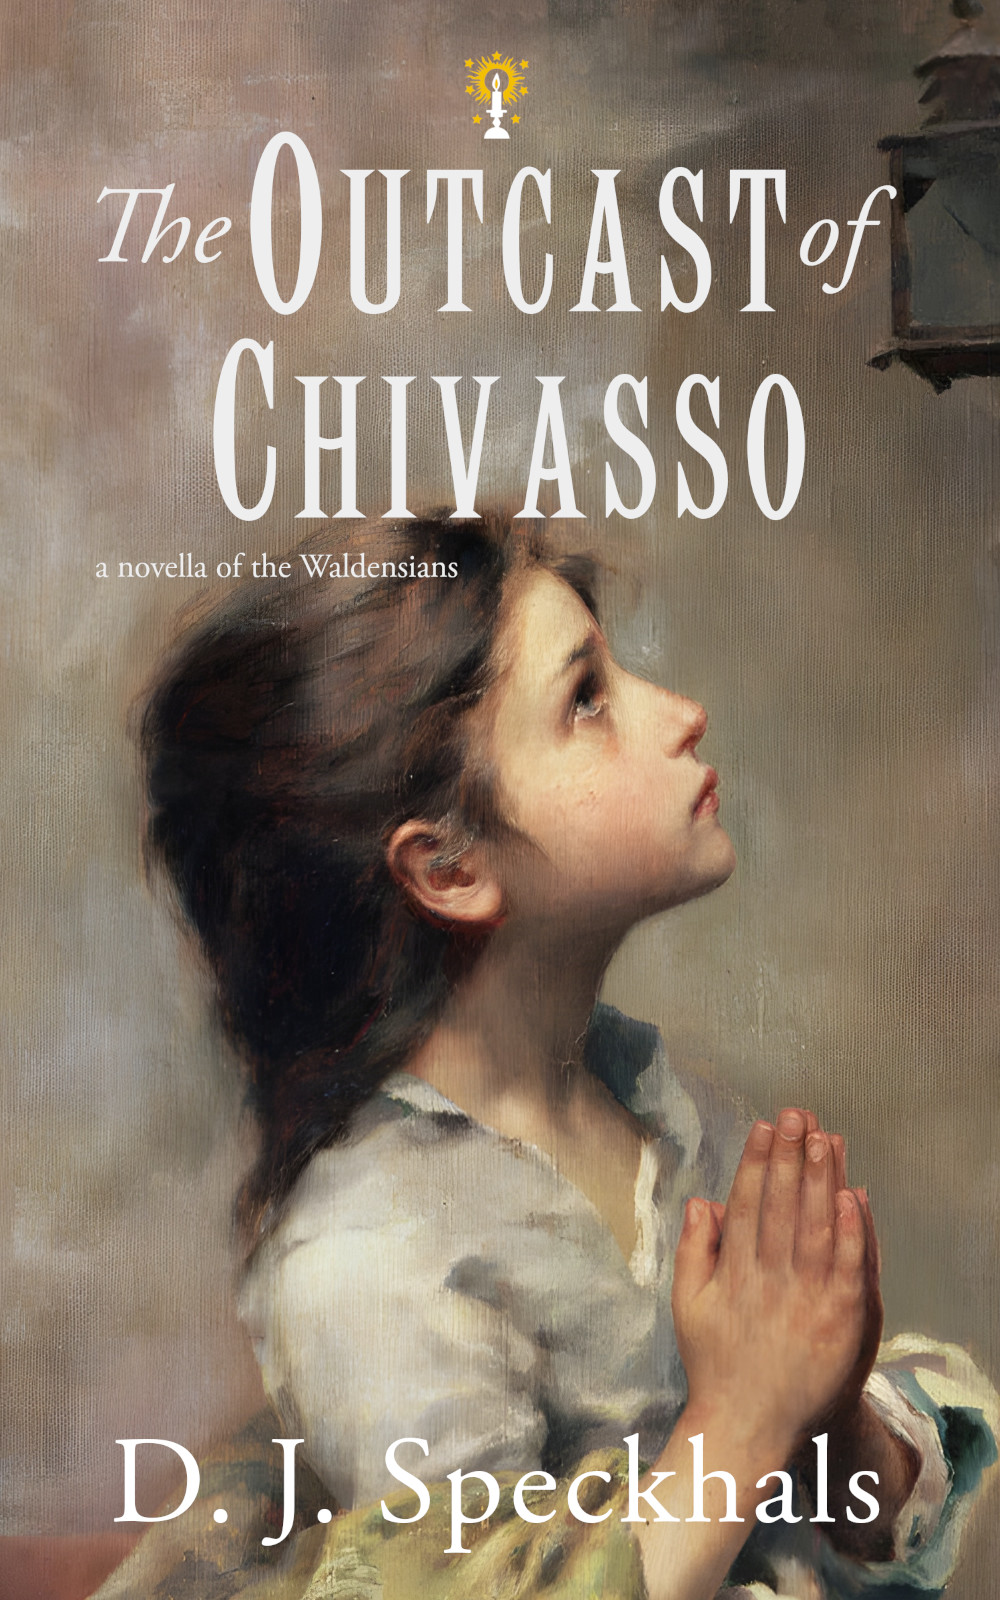 image from The Outcast of Chivasso